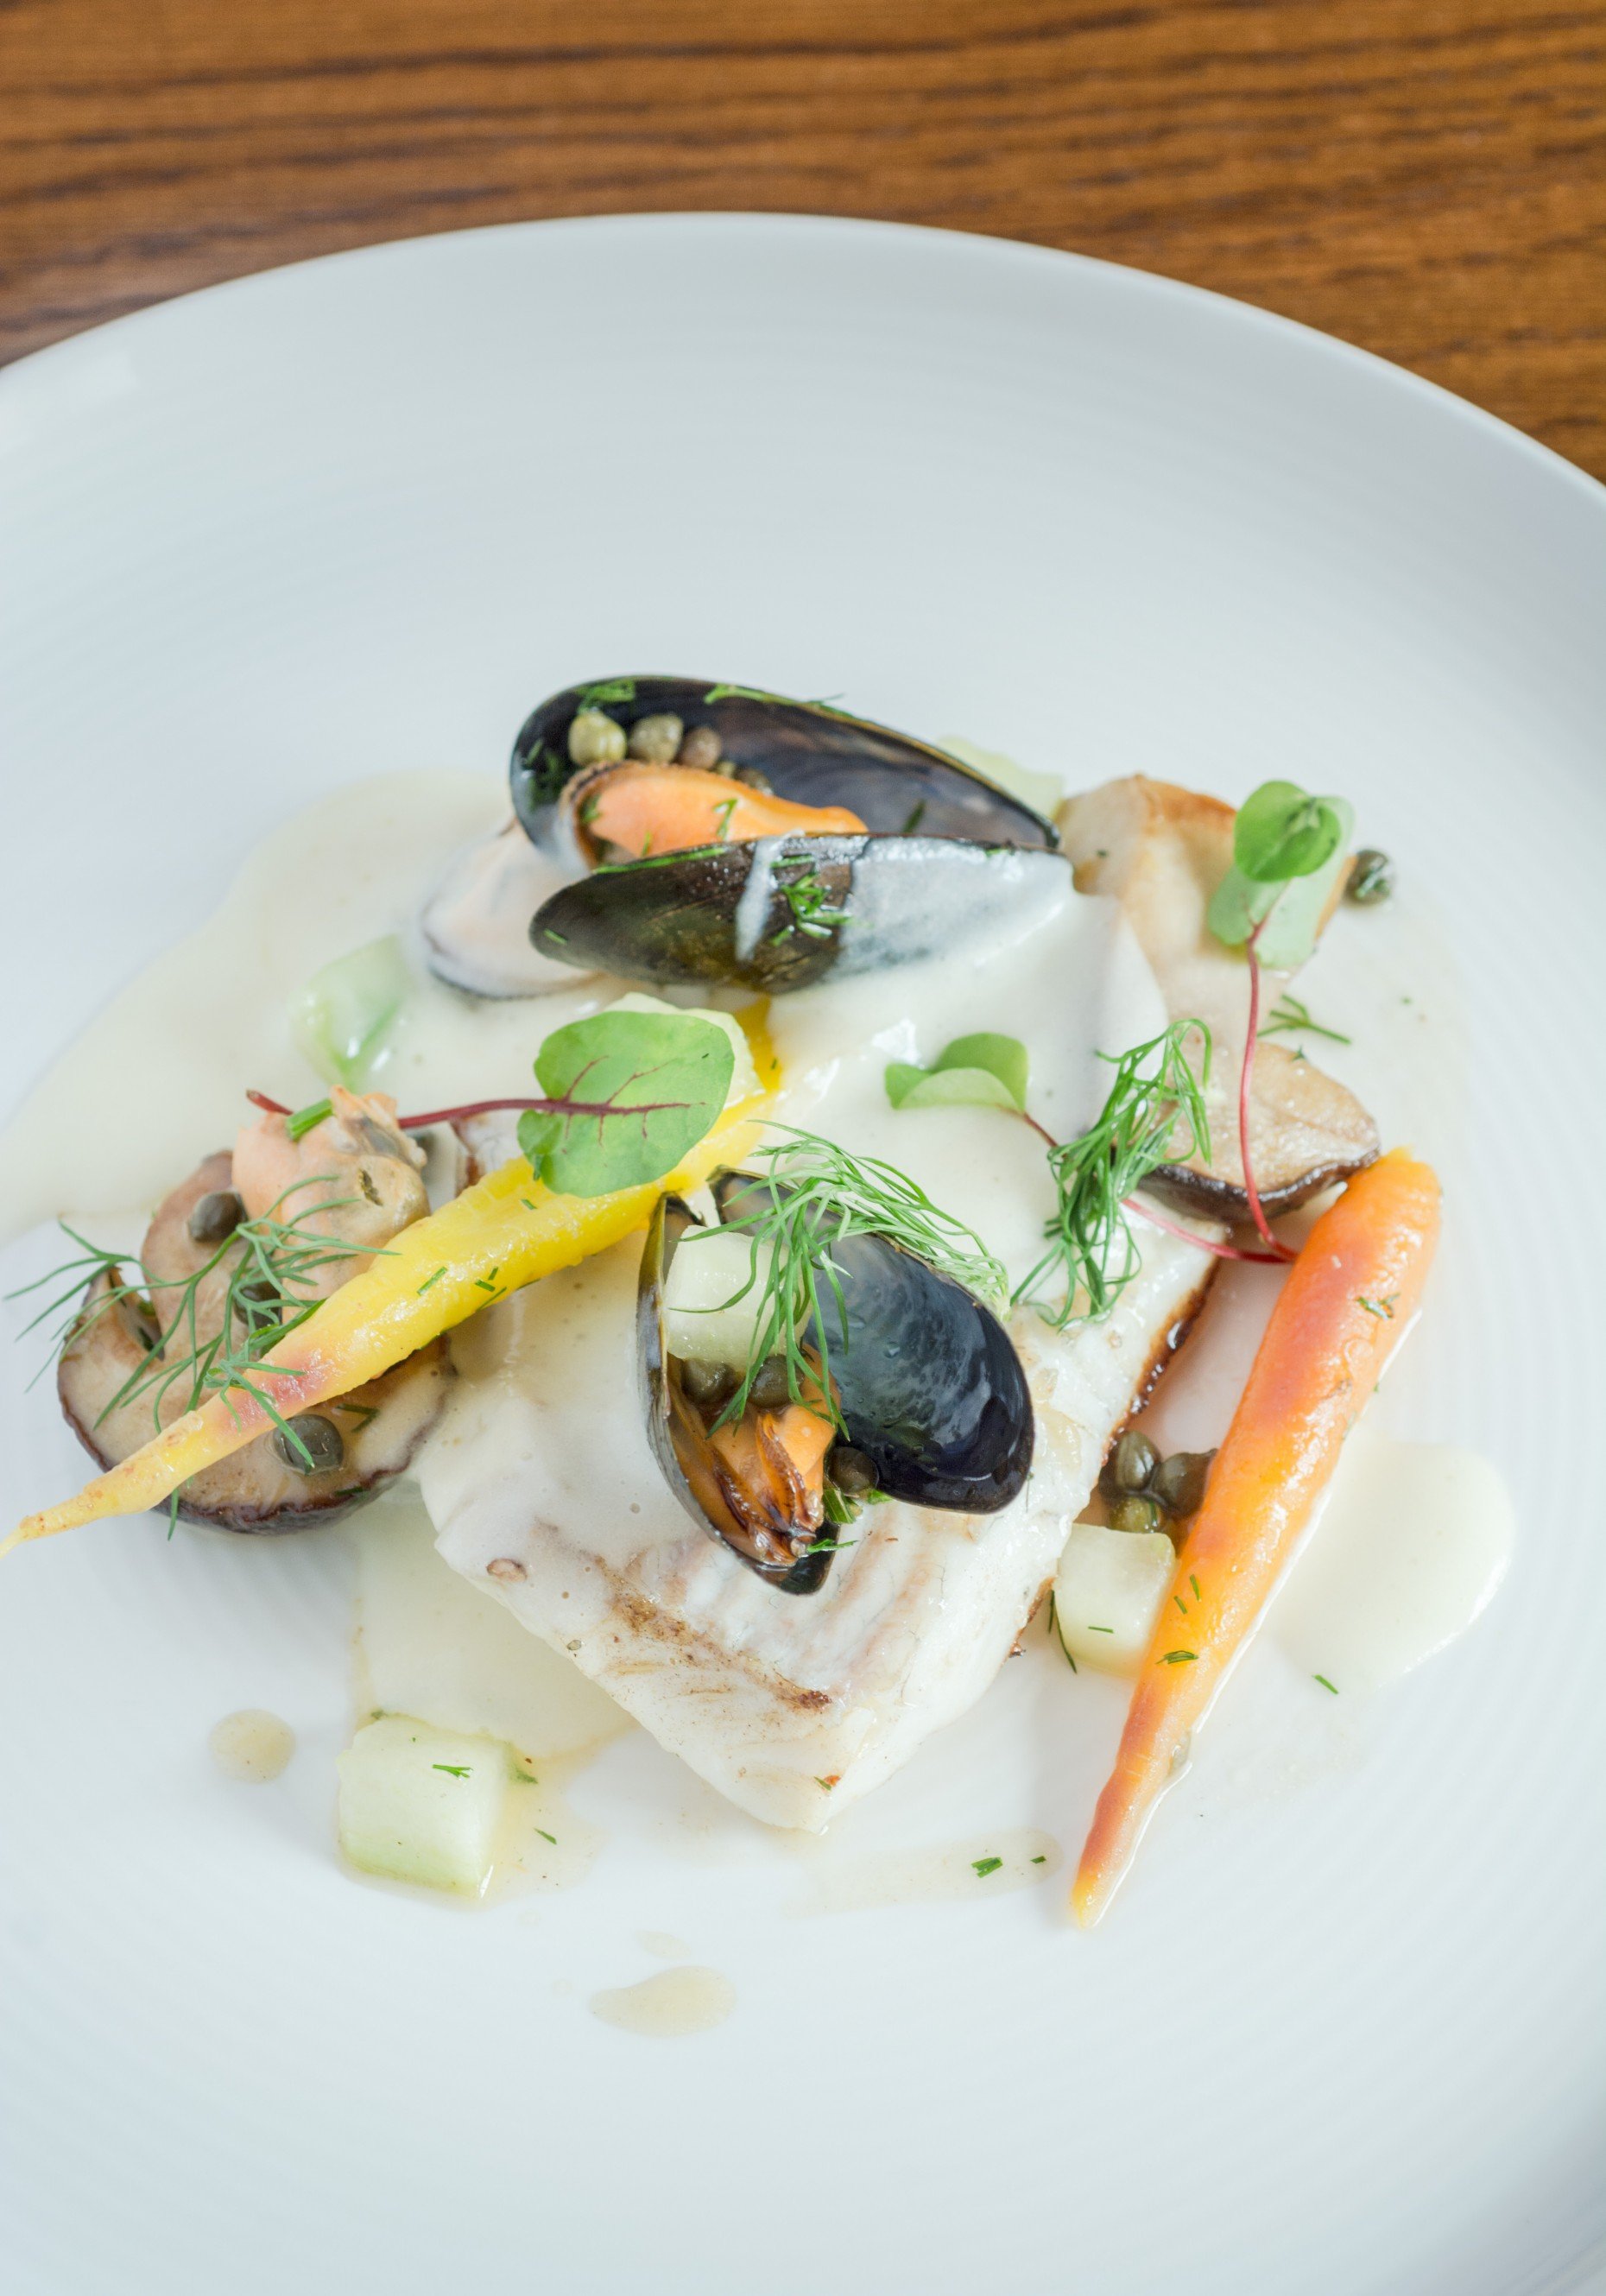 Roast Turbot, Smoked Mussels, Capers, Wild Mushrooms and Yukon Gold Foam (as featured in the Lincolnshire Cook Book. ).